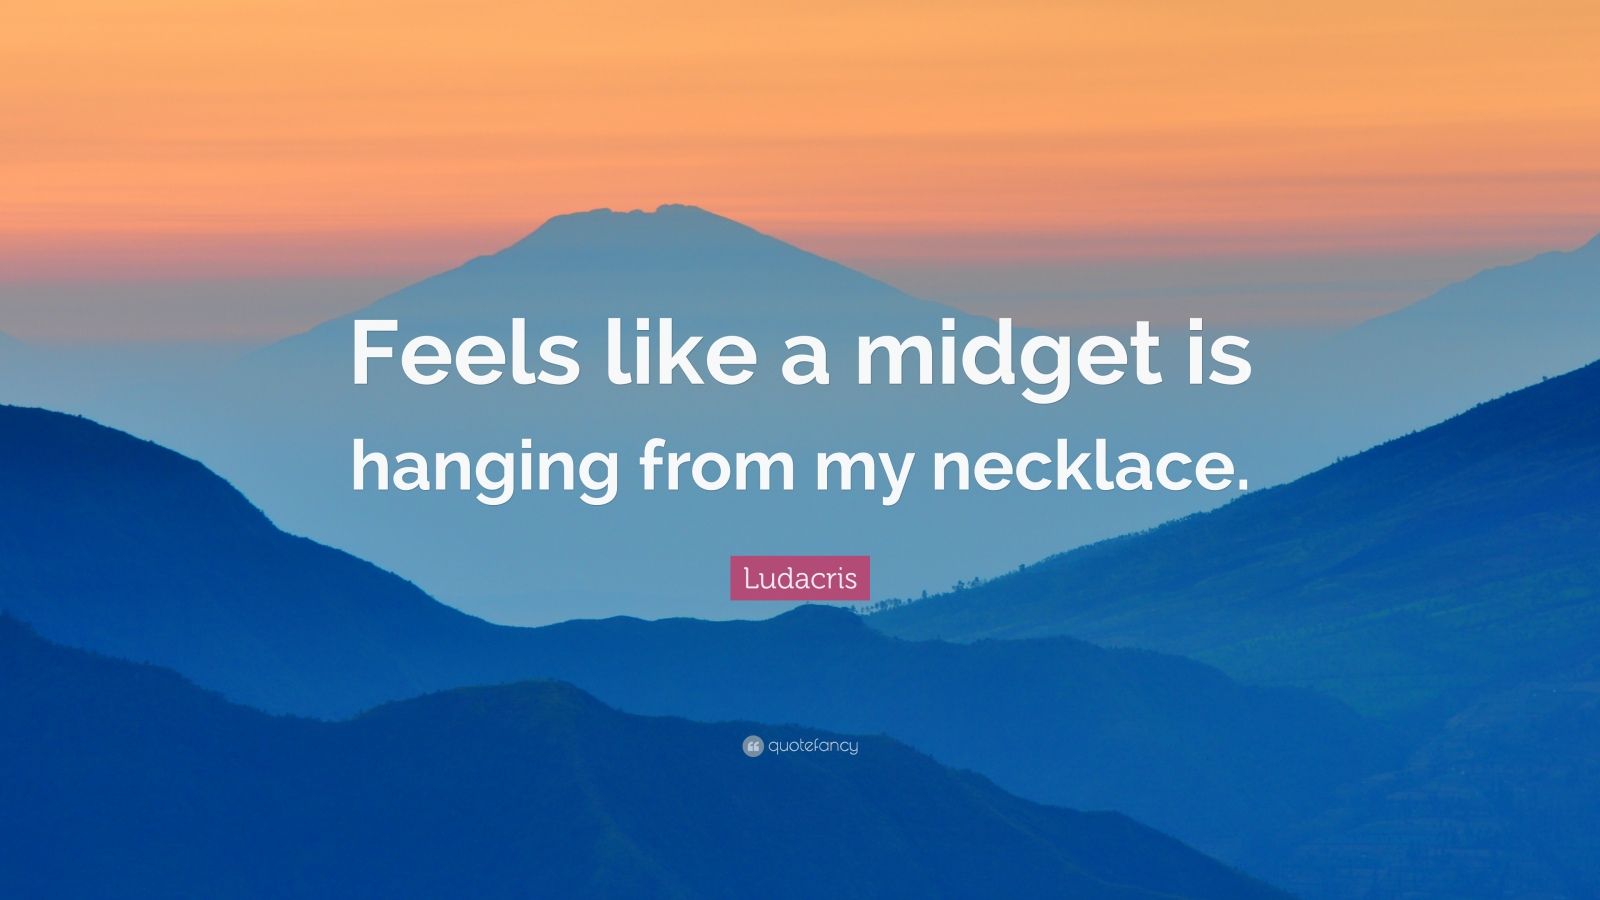 Ludacris Quote: "Feels like a midget is hanging from my ...